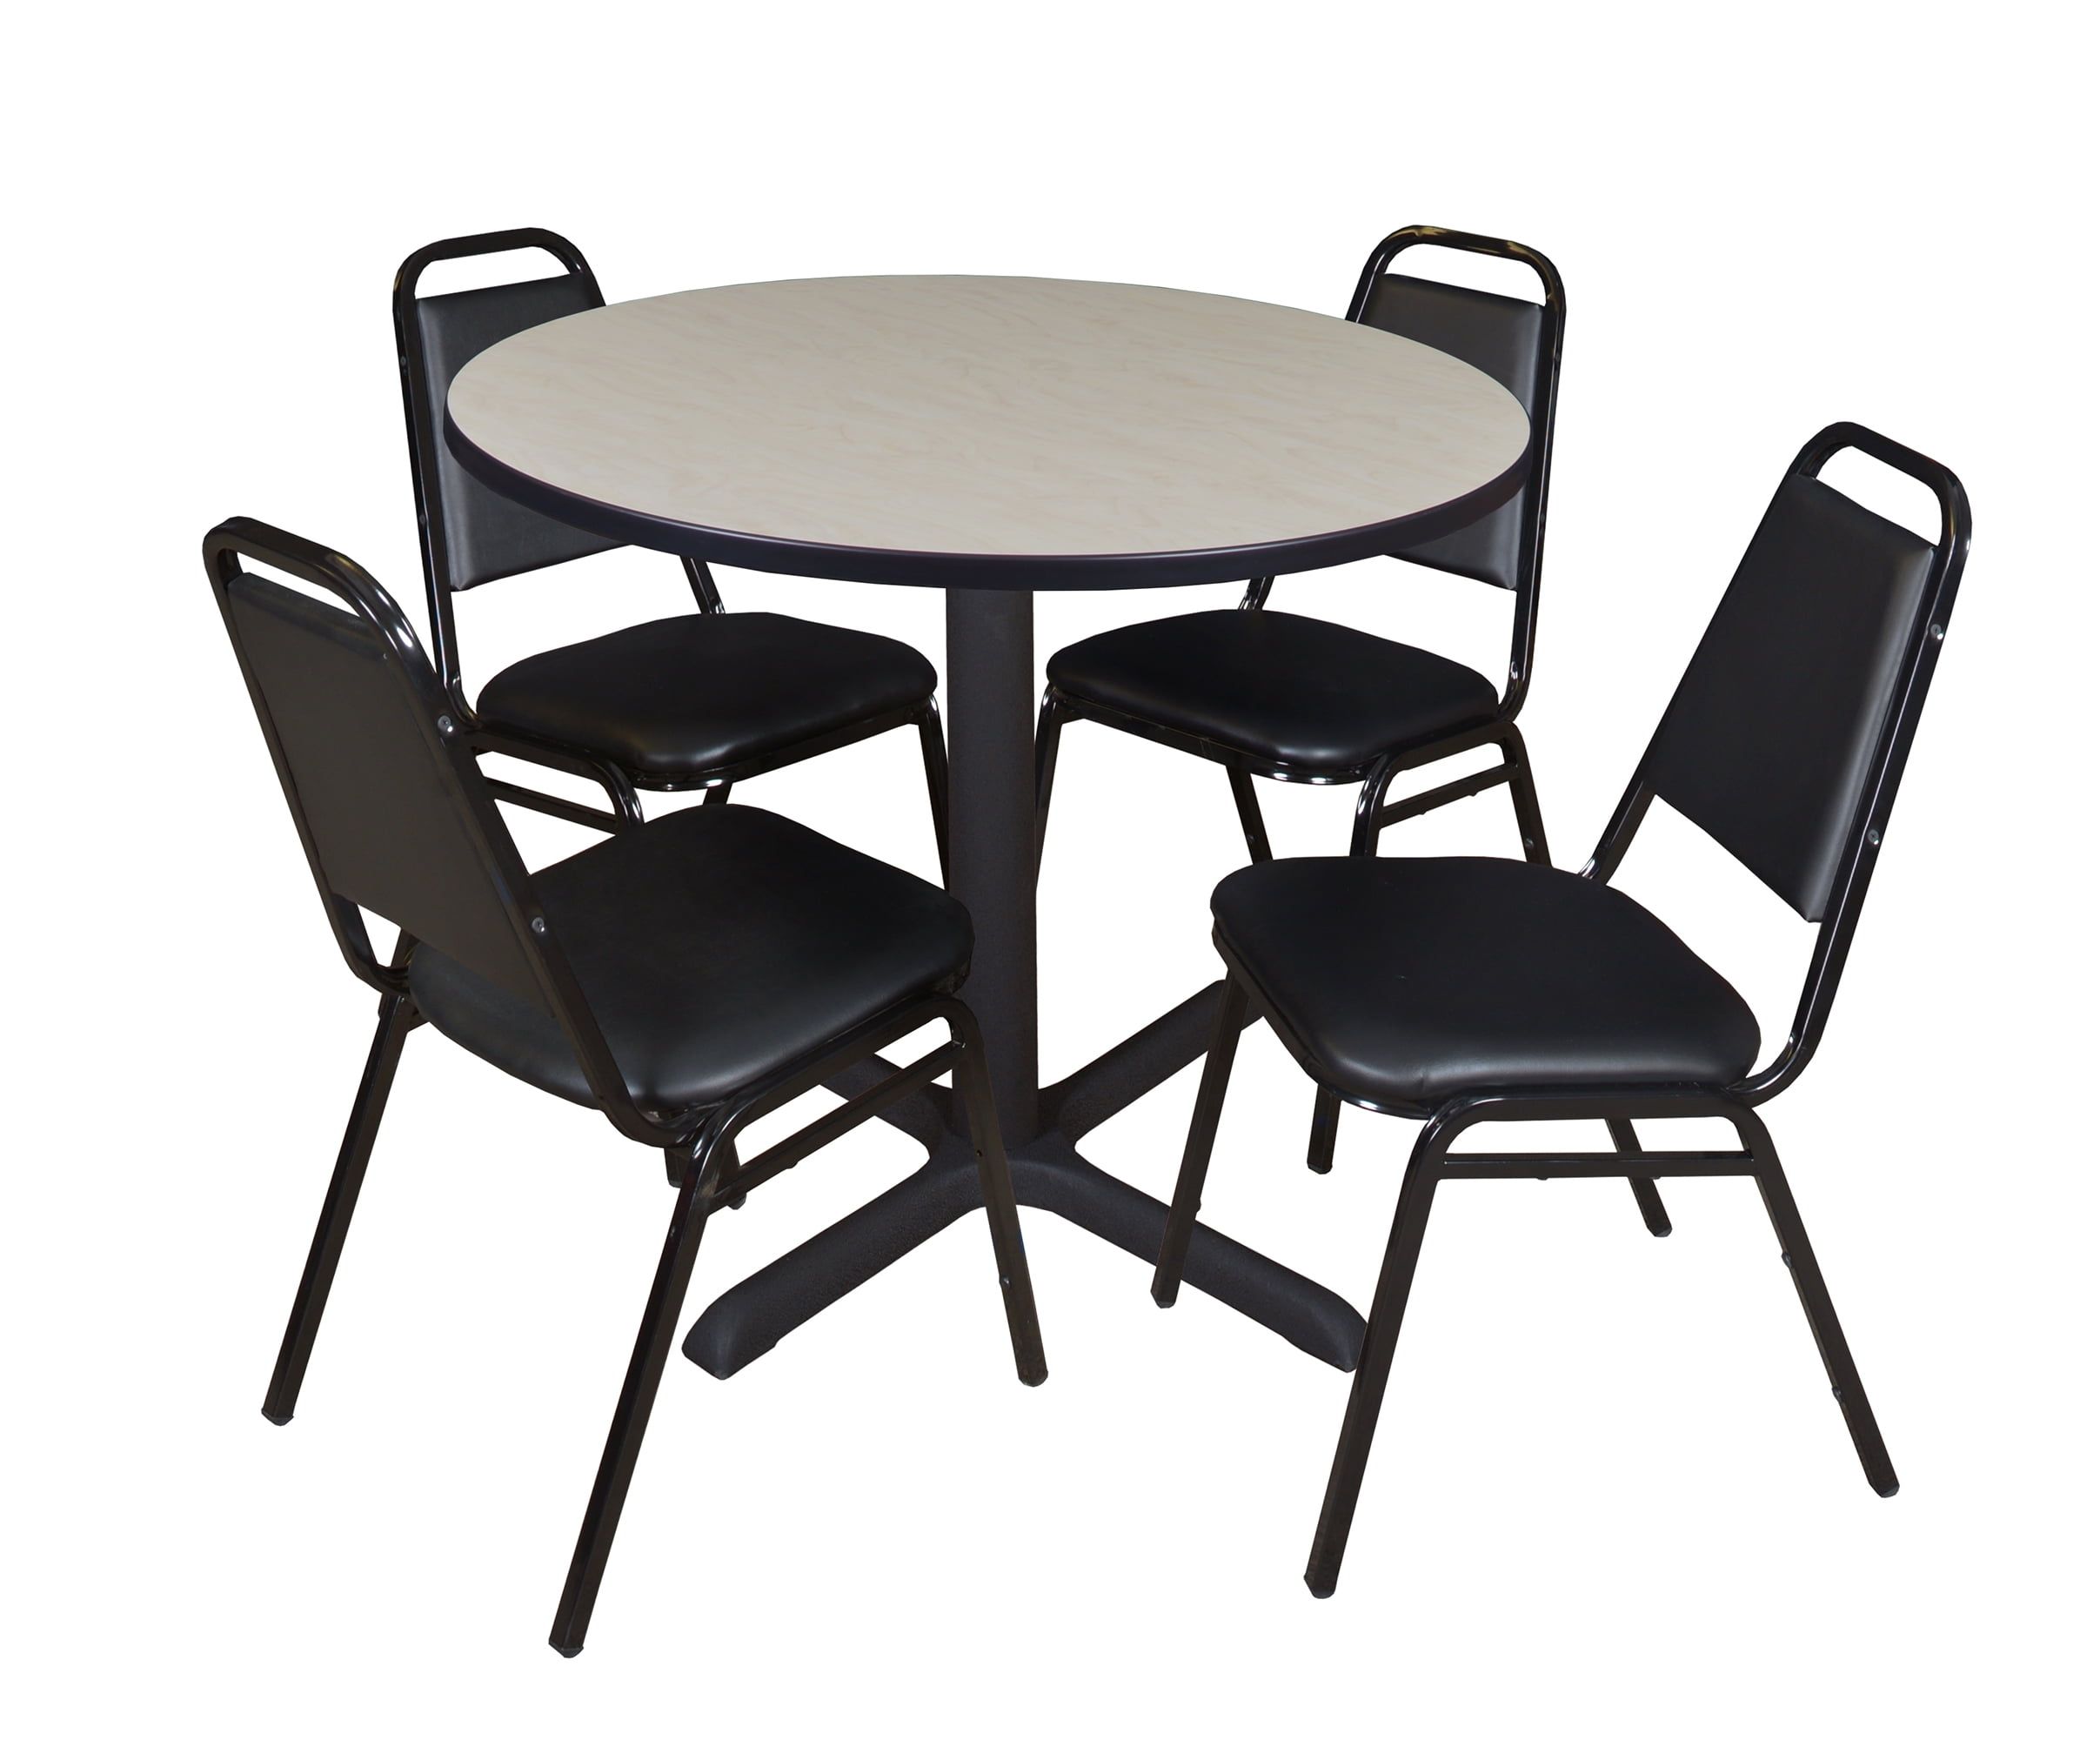 Regency Cain Round Breakroom Table With 4 Stackable Restaurant Chairs Throughout Regency Cain Steel Coffee Tables (View 20 of 21)